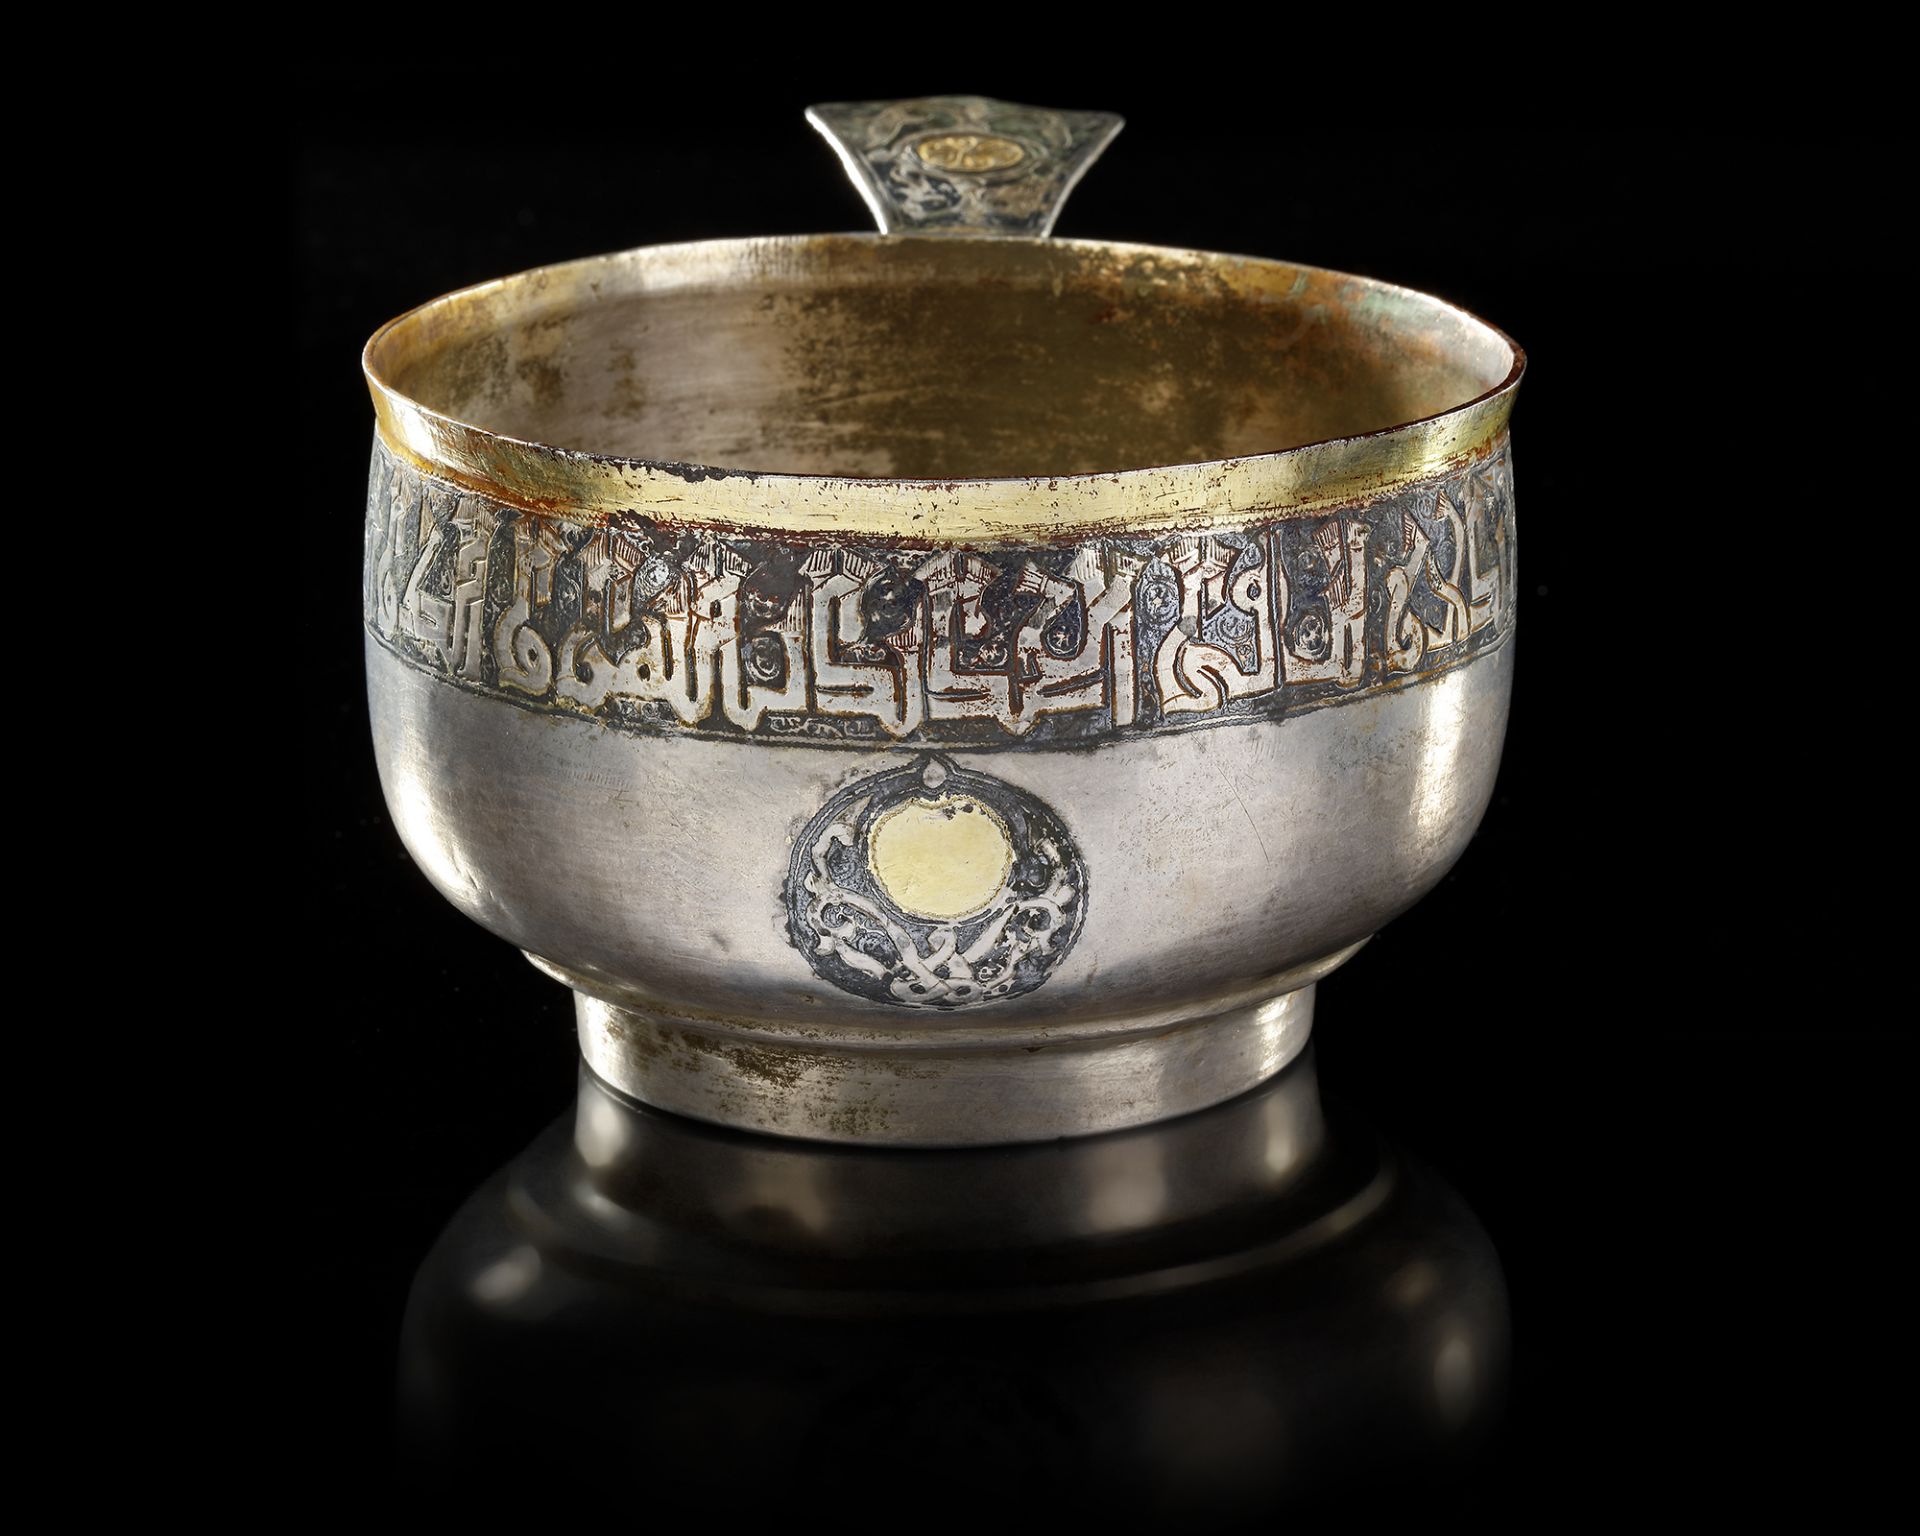 A RARE SILVER AND NIELLOED CUP WITH KUFIC INSCRIPTION, PERSIA OR CENTRAL ASIA, 11TH-12TH CENTURY - Image 16 of 34